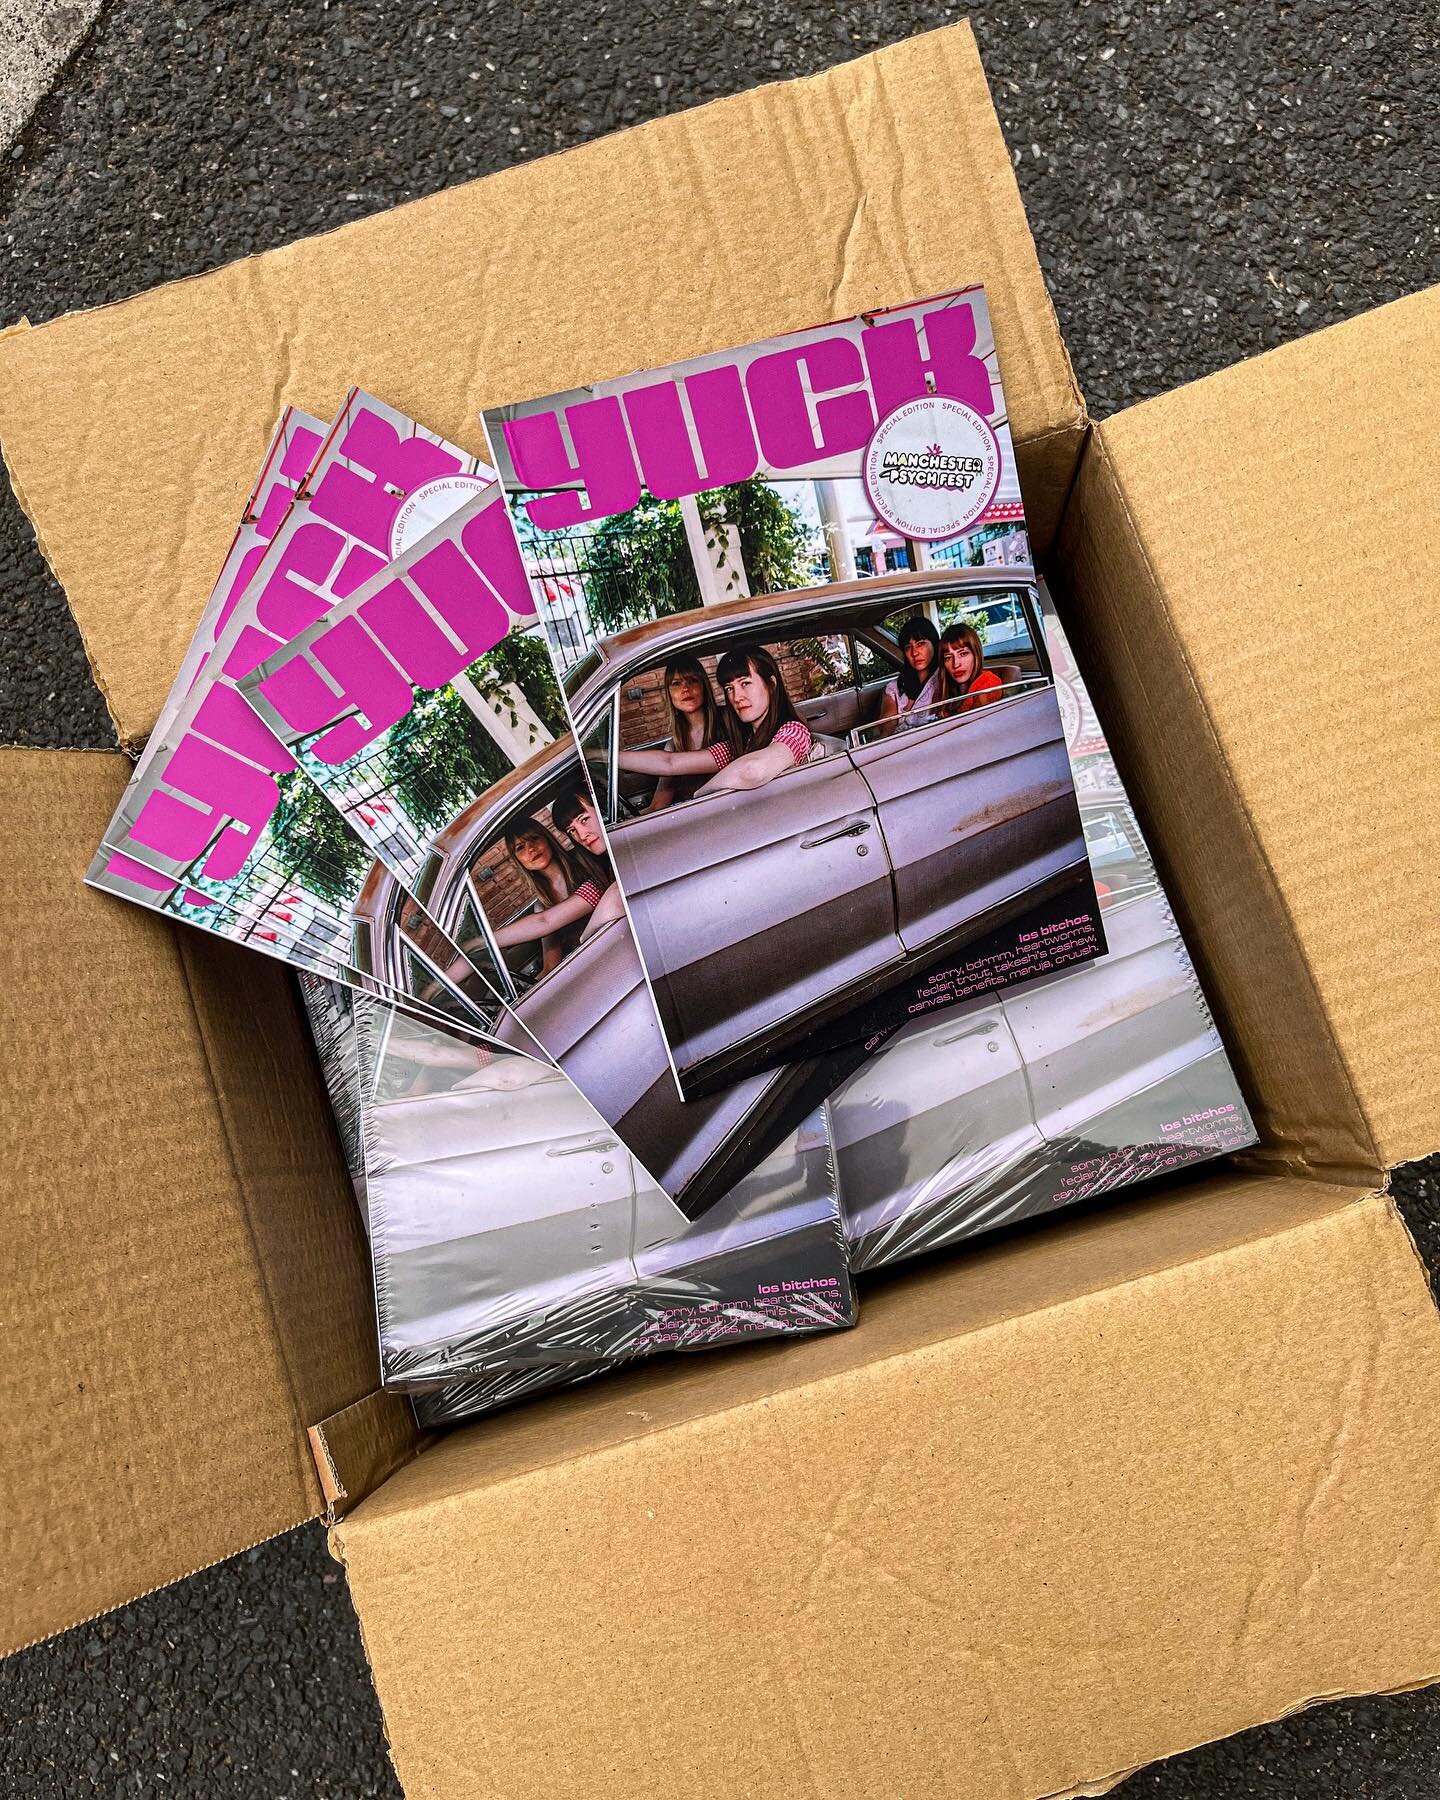 👀 Look at what&rsquo;s arrived 👀

Grab a copy online now or from the @manchesterpsychfest Festival Hub at &lsquo;Cactus Square&rsquo; from 10am tomorrow. 

See you down the front!